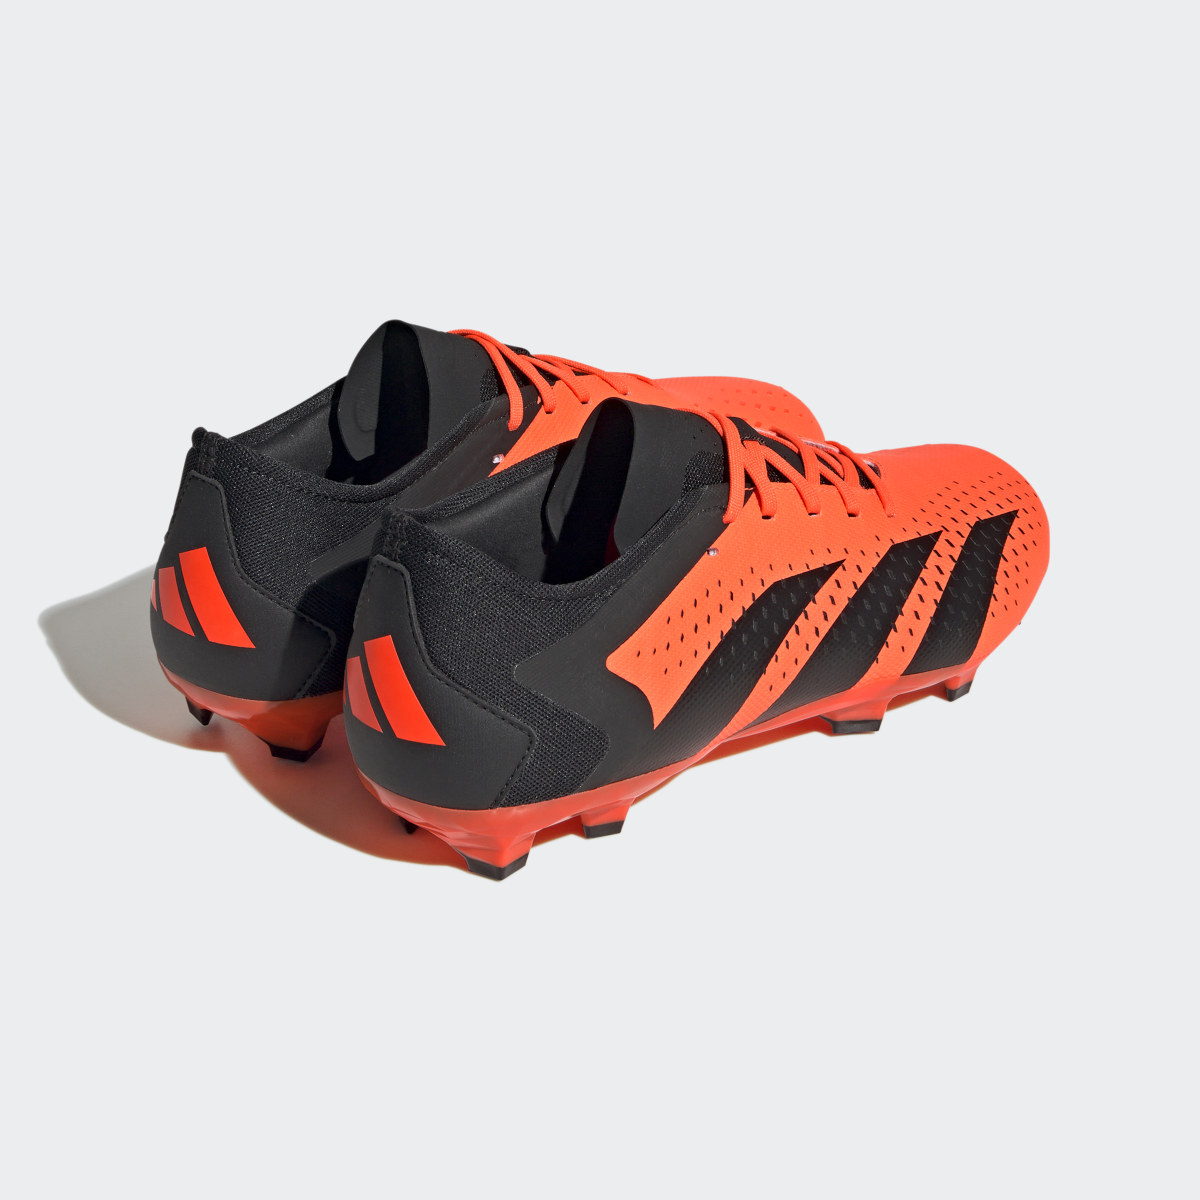 Adidas Predator Accuracy.3 Low Firm Ground Boots. 6